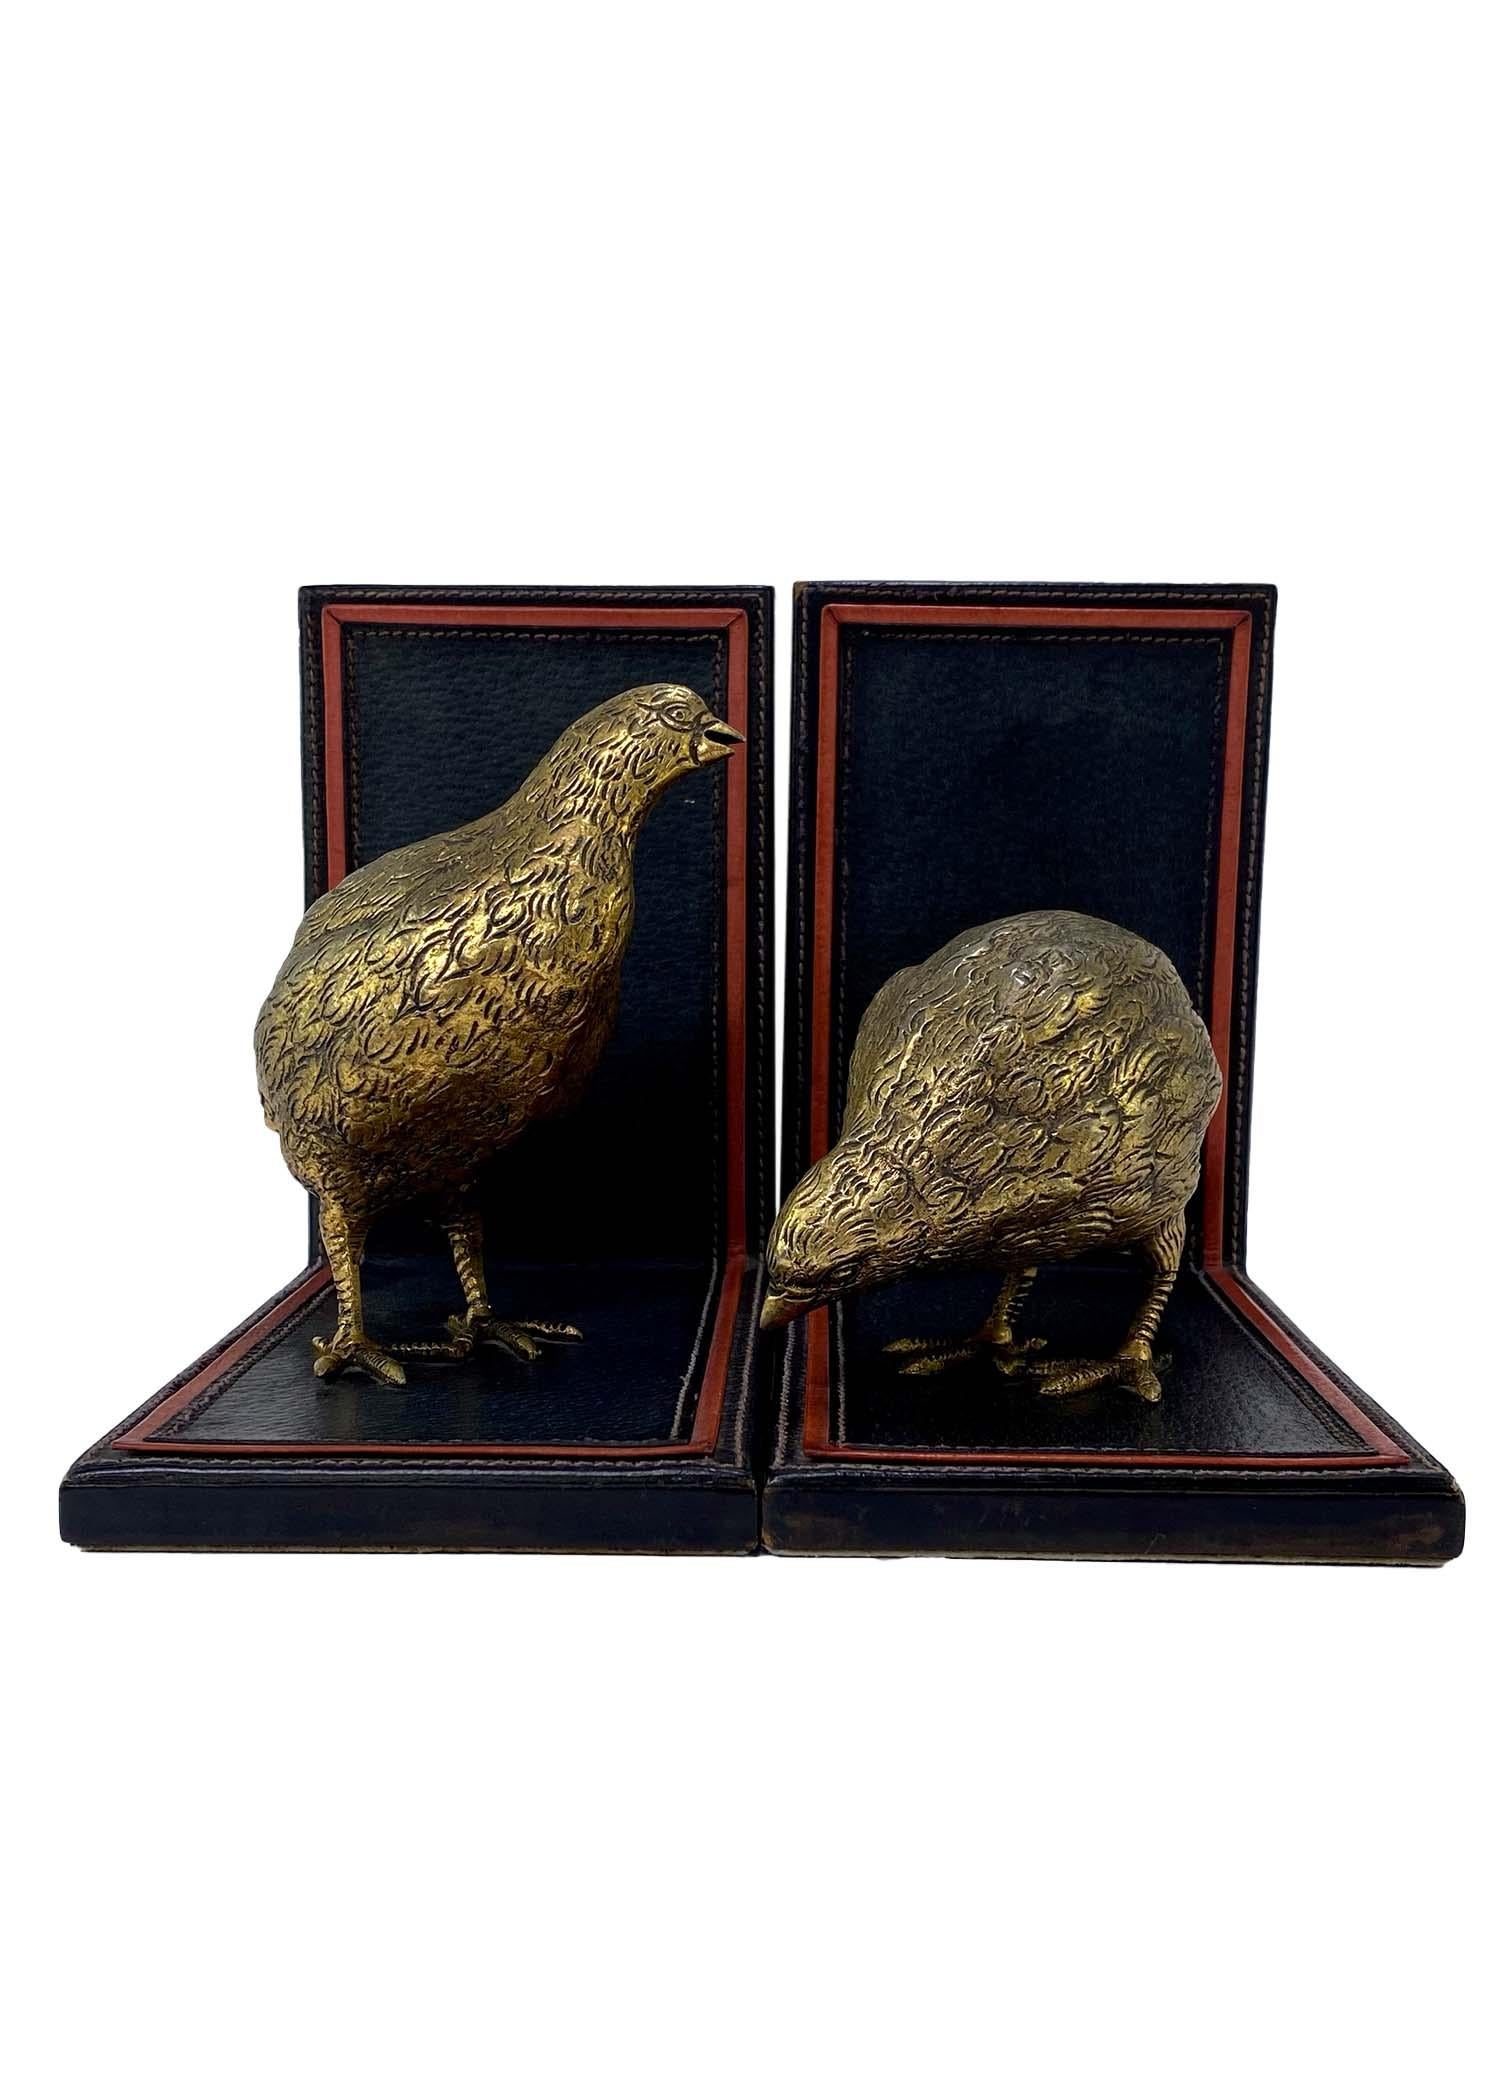 TheRealList presents: a set of gold quail figures on leather bookends, designed by Gucci. The metal models elevate the country and equestrian influences of early Gucci, making them chic and shiny. These bookends feature two quail figures in